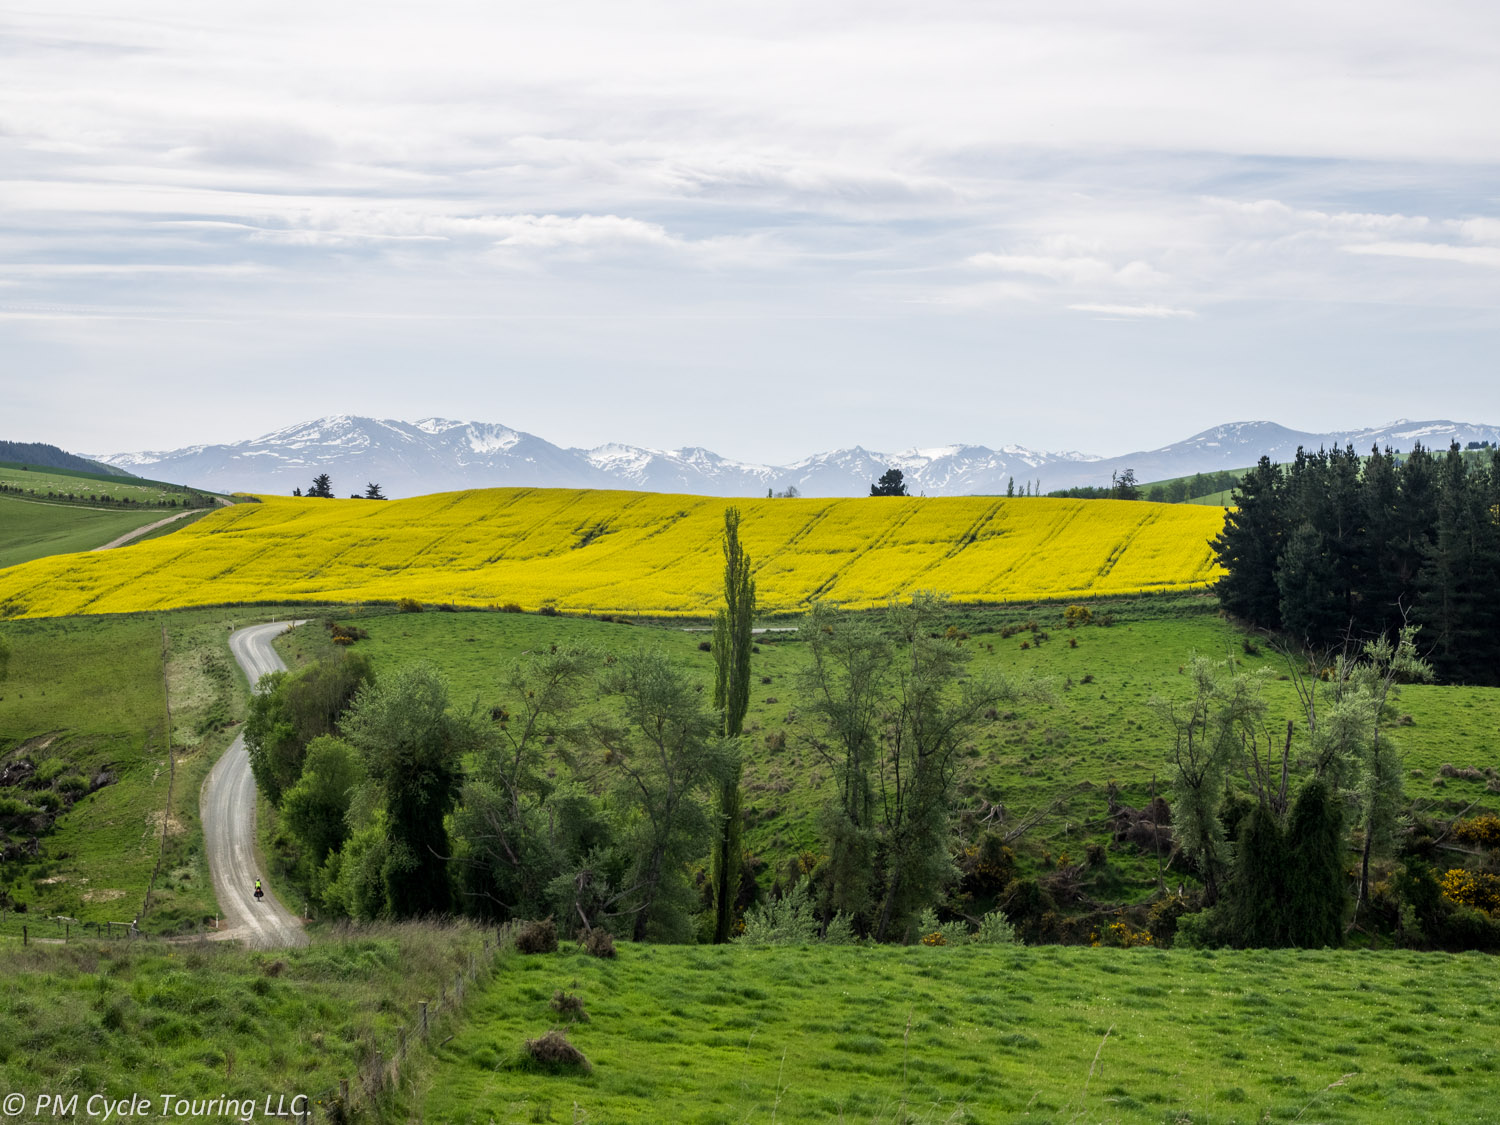 Yellow fields in background, green fields in foreground, mountains in the distance